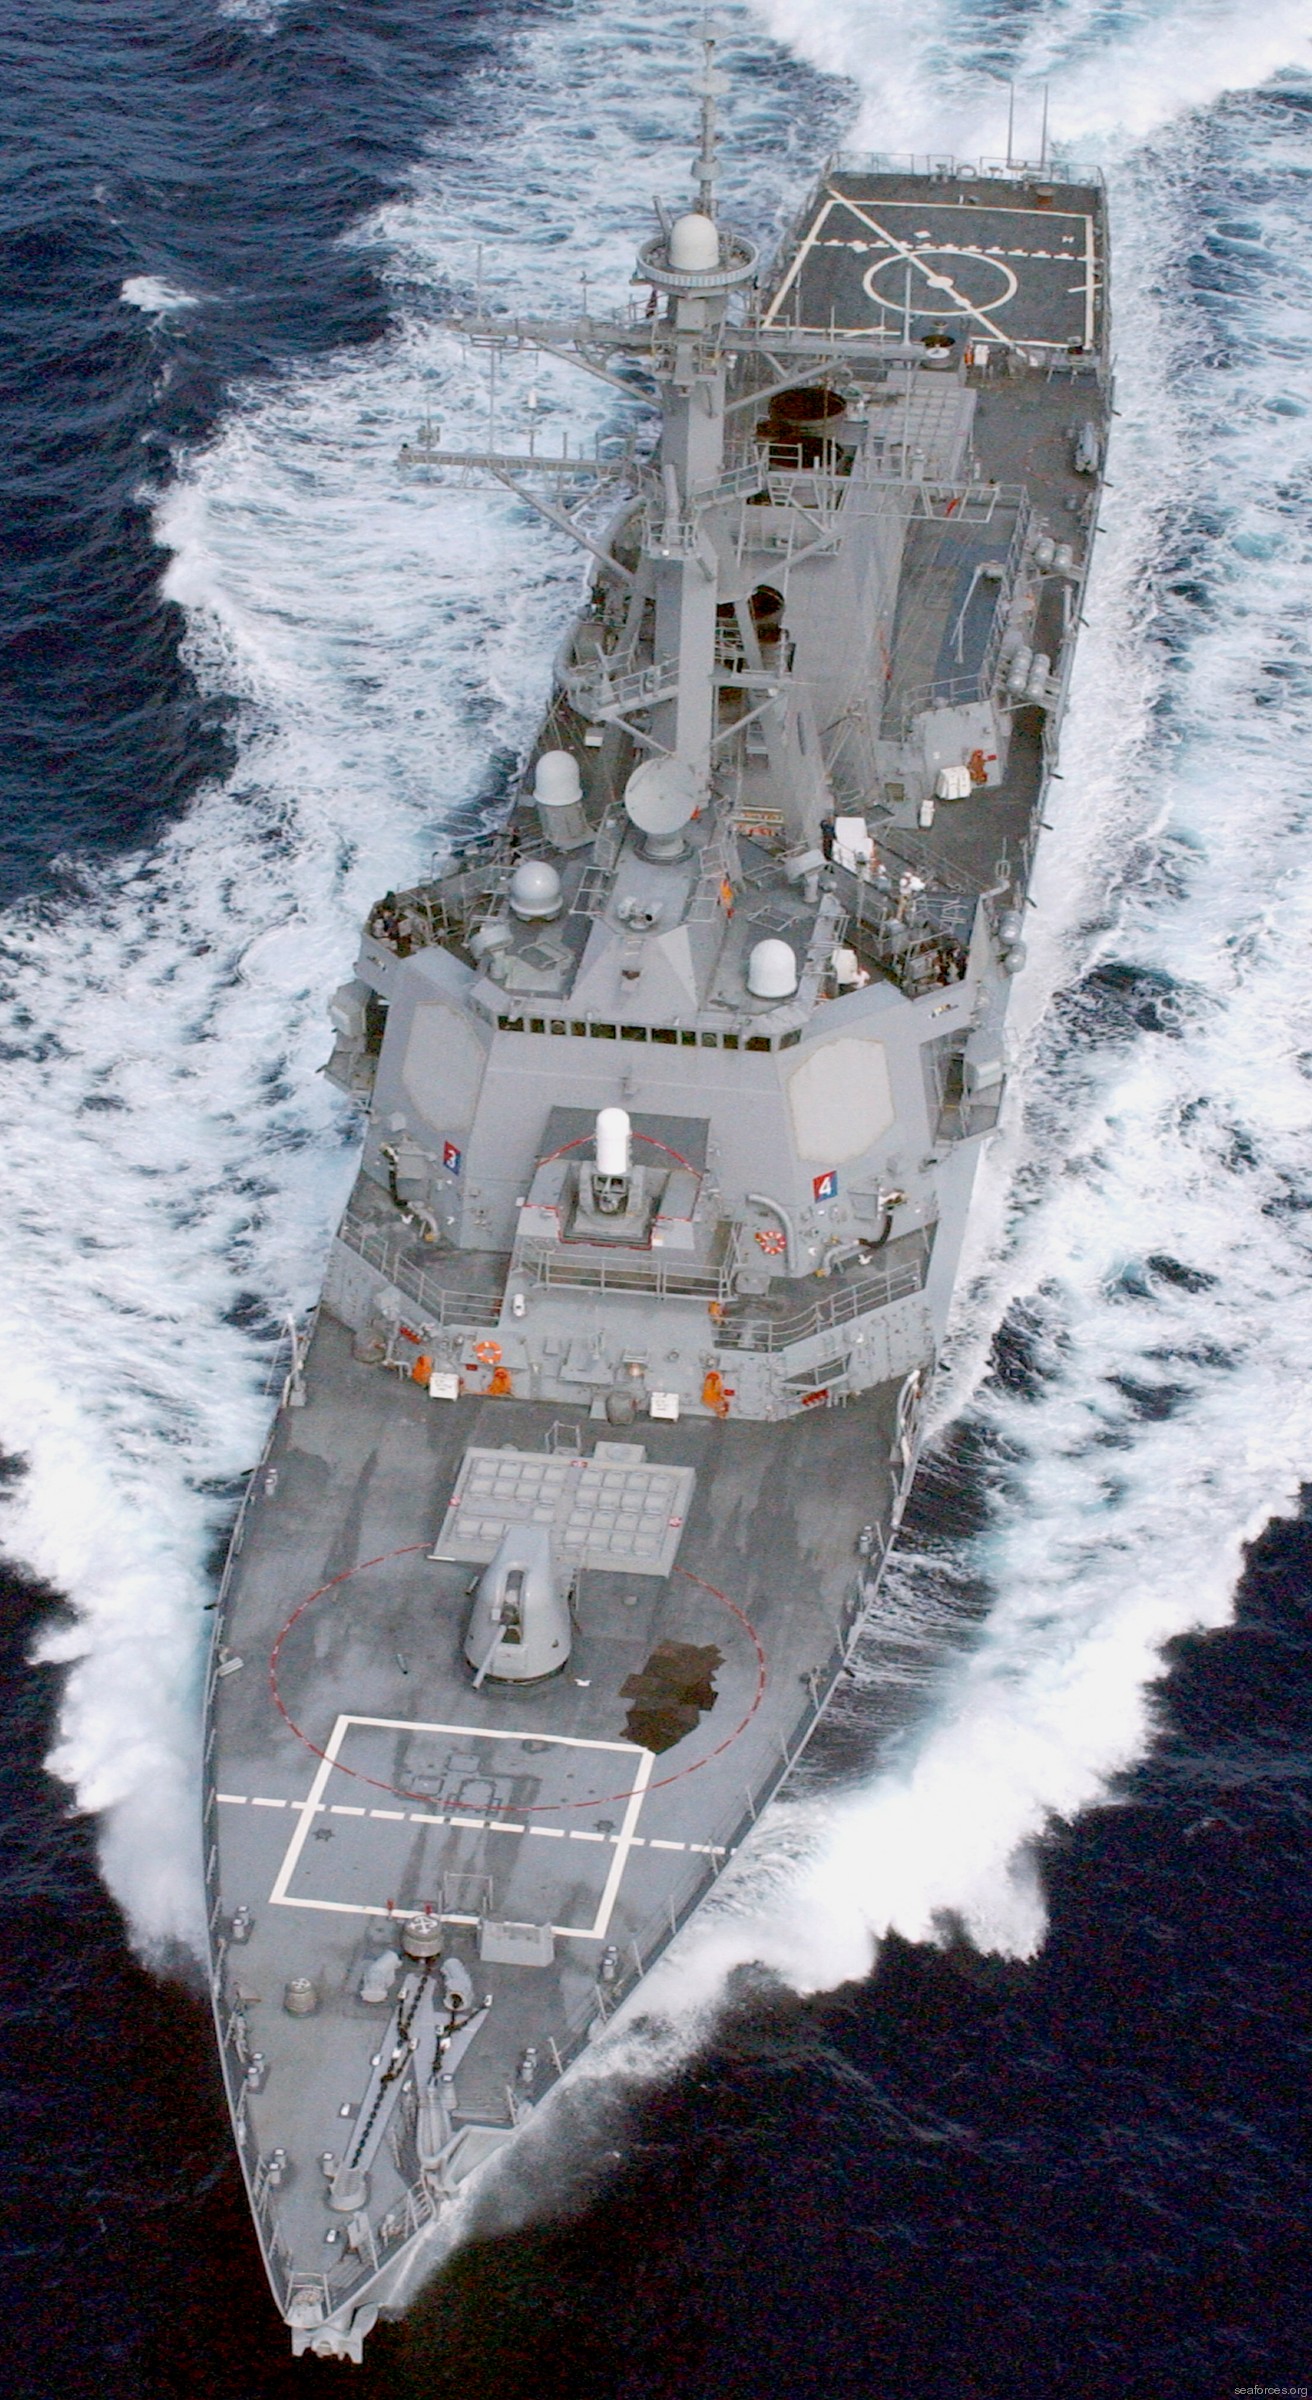 ddg-67 uss cole guided missile destroyer arleigh burke class navy aegis 48